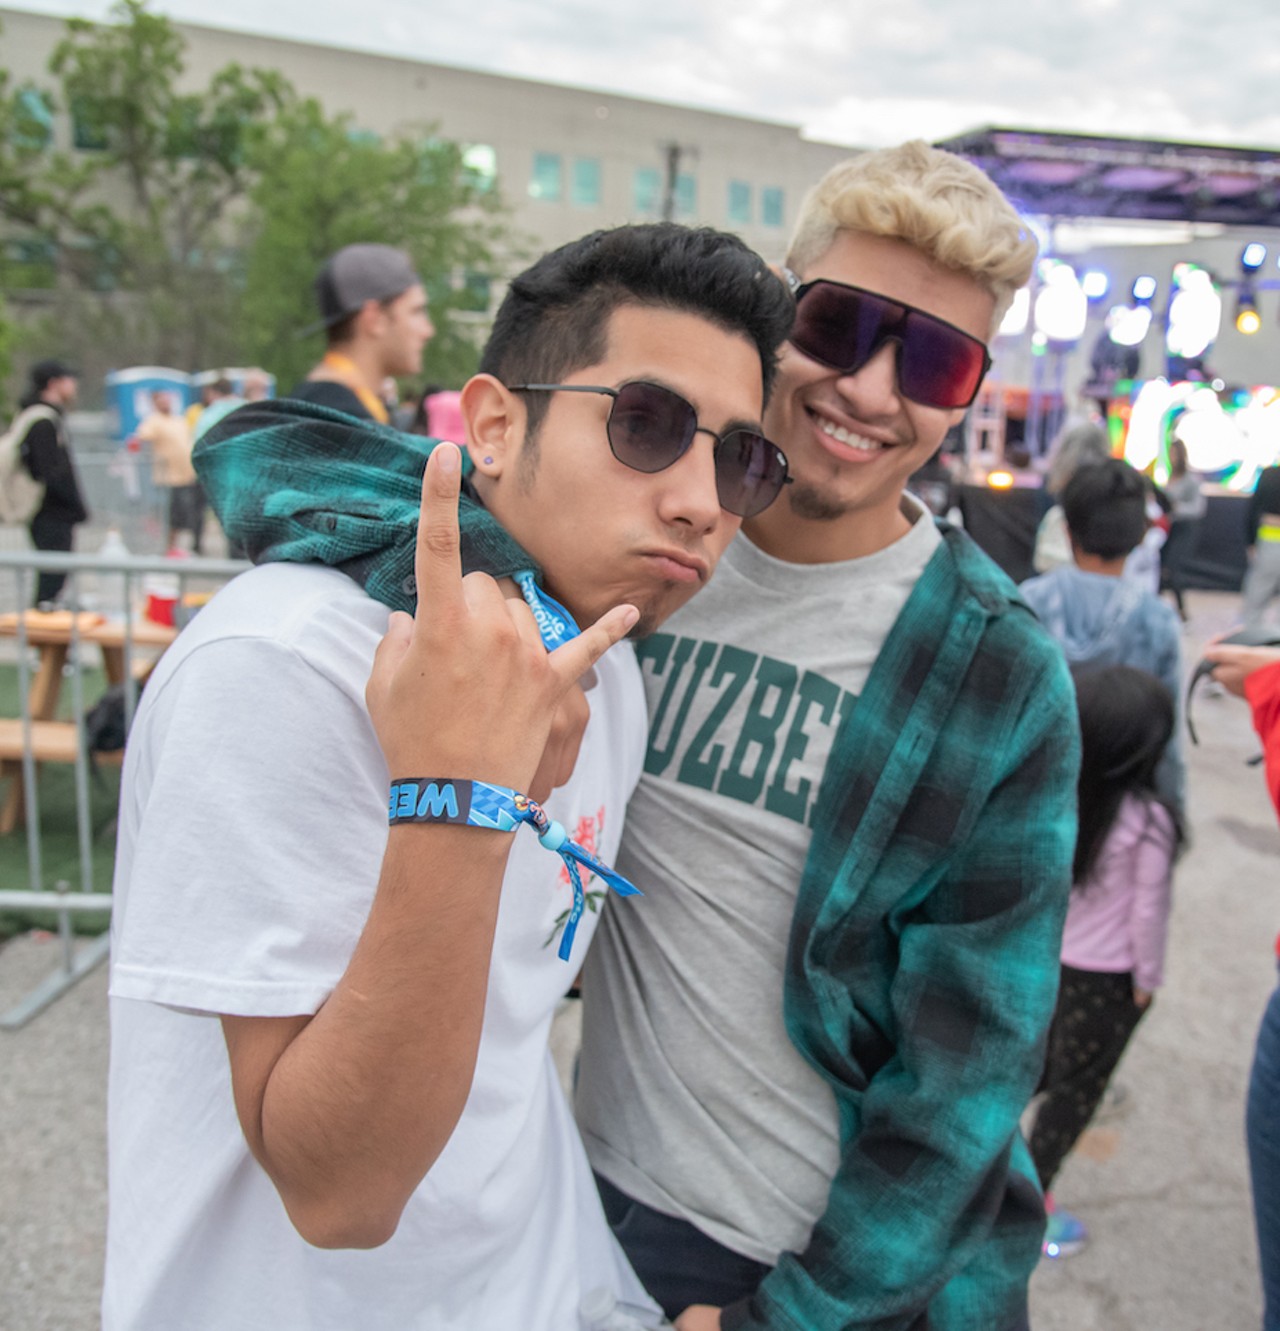 All the cool people we saw at San Antonio's first Electric Cookout